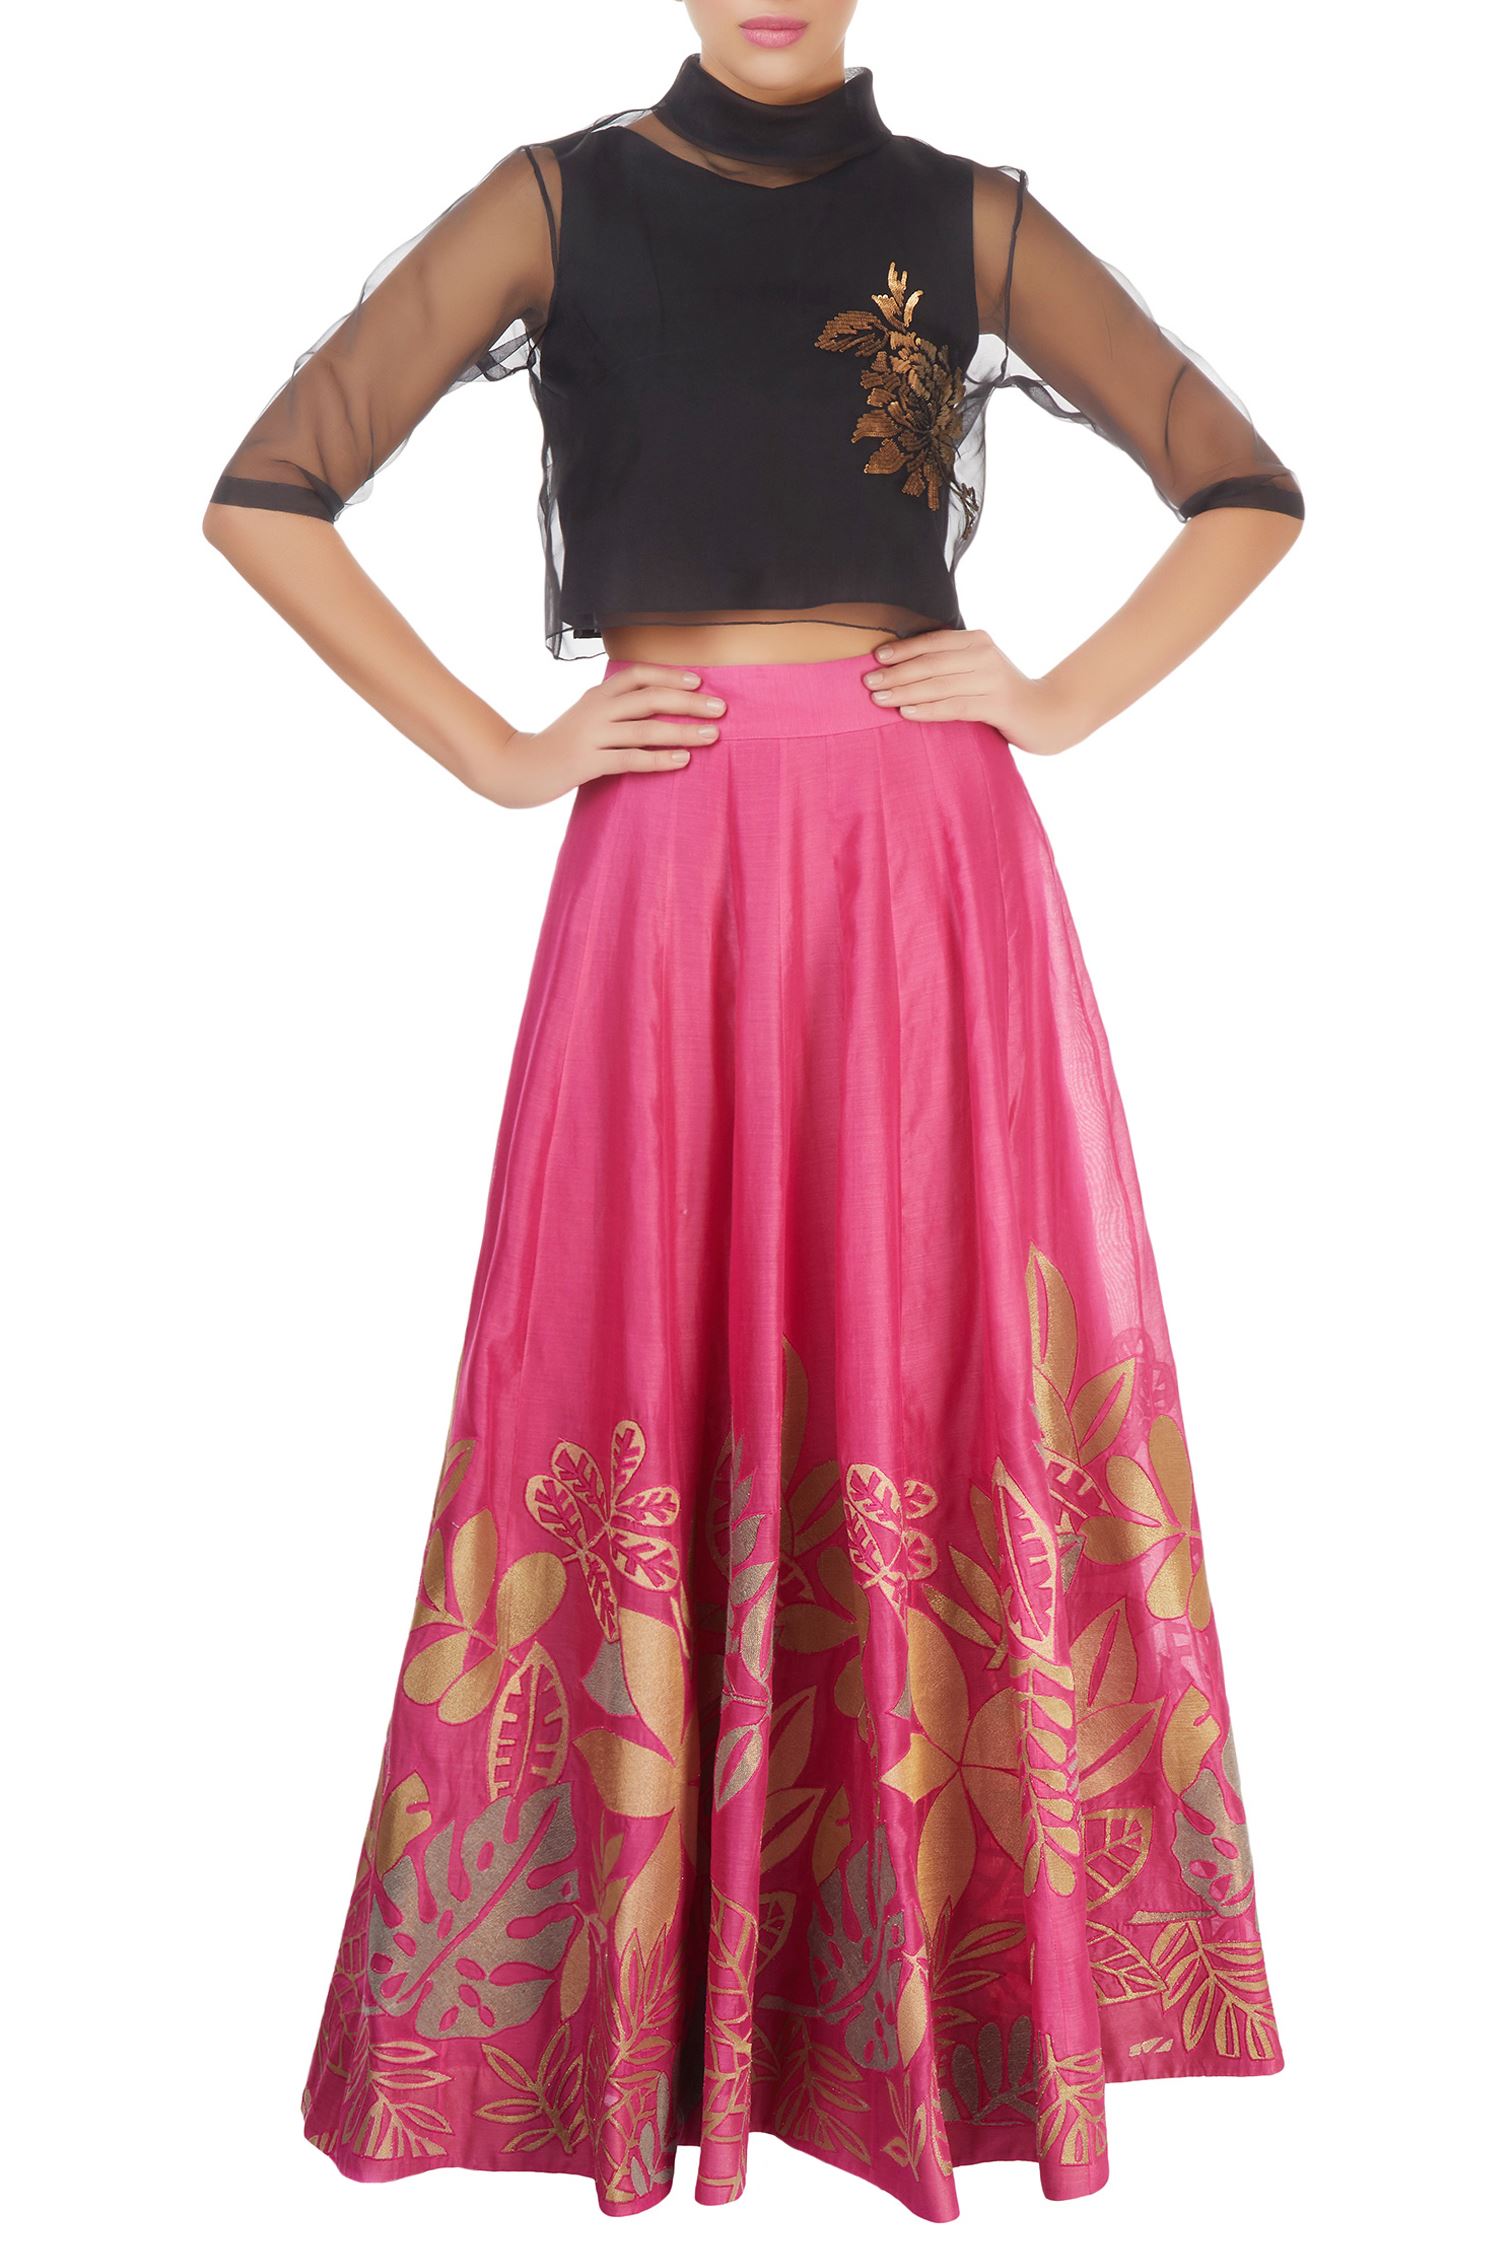 Buy Pink skirt with floral motif by Taika by Poonam Bhagat at Aza Fashions